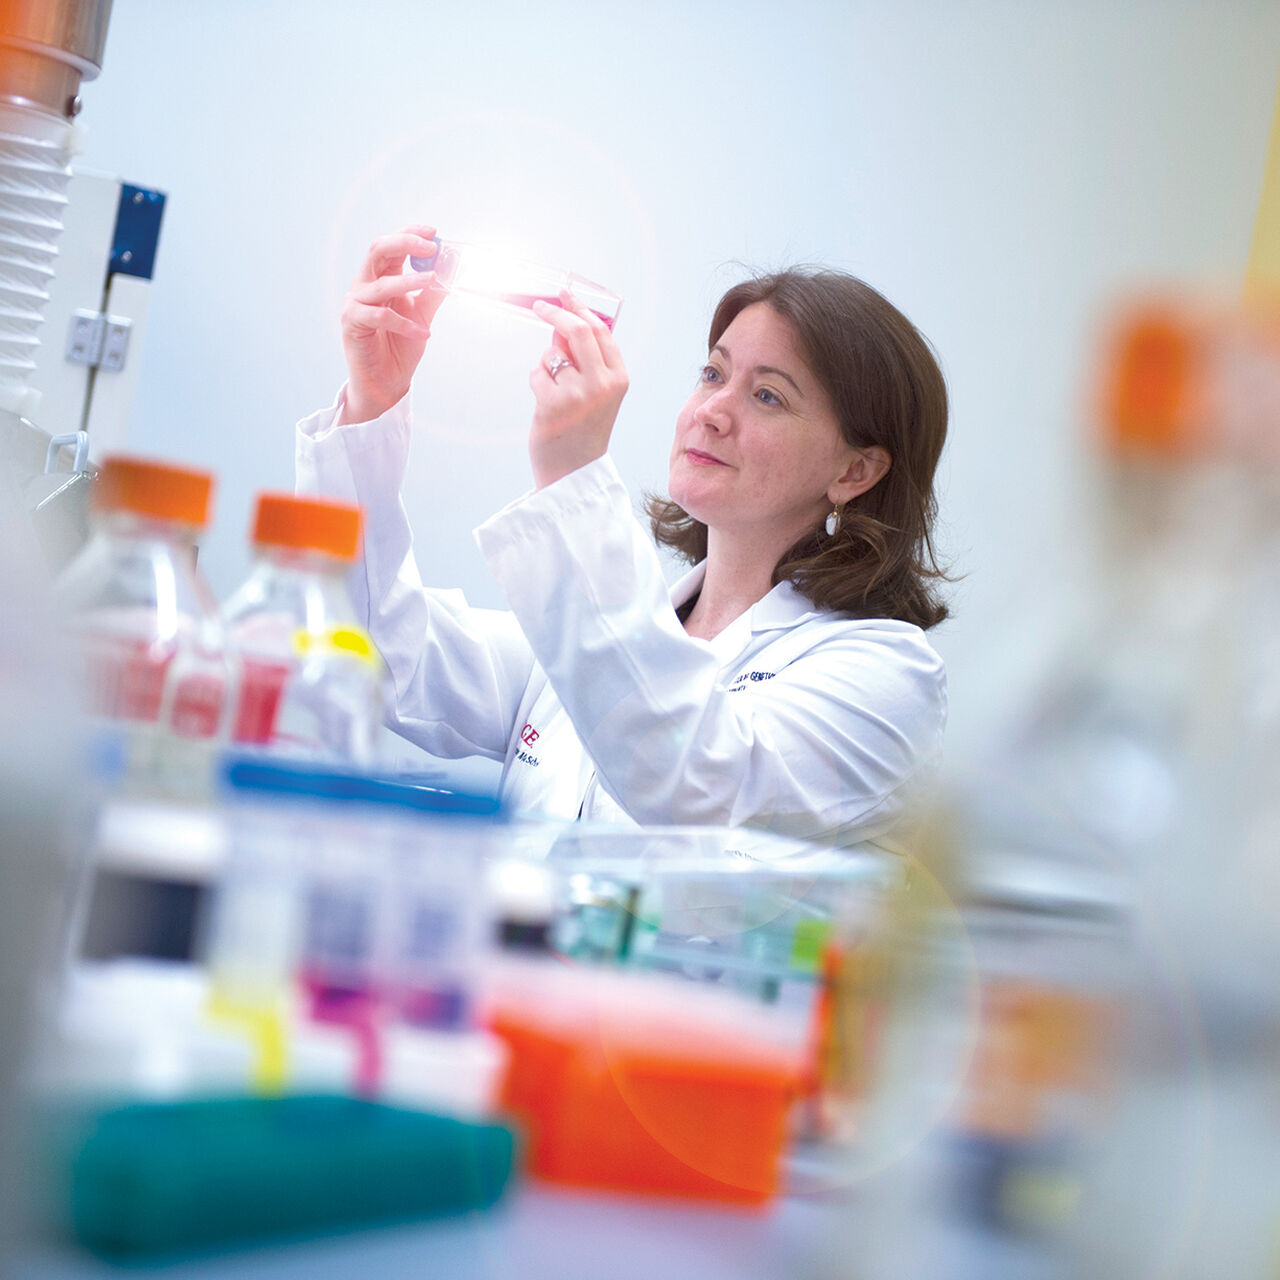 Researcher working in laboratory image number 0